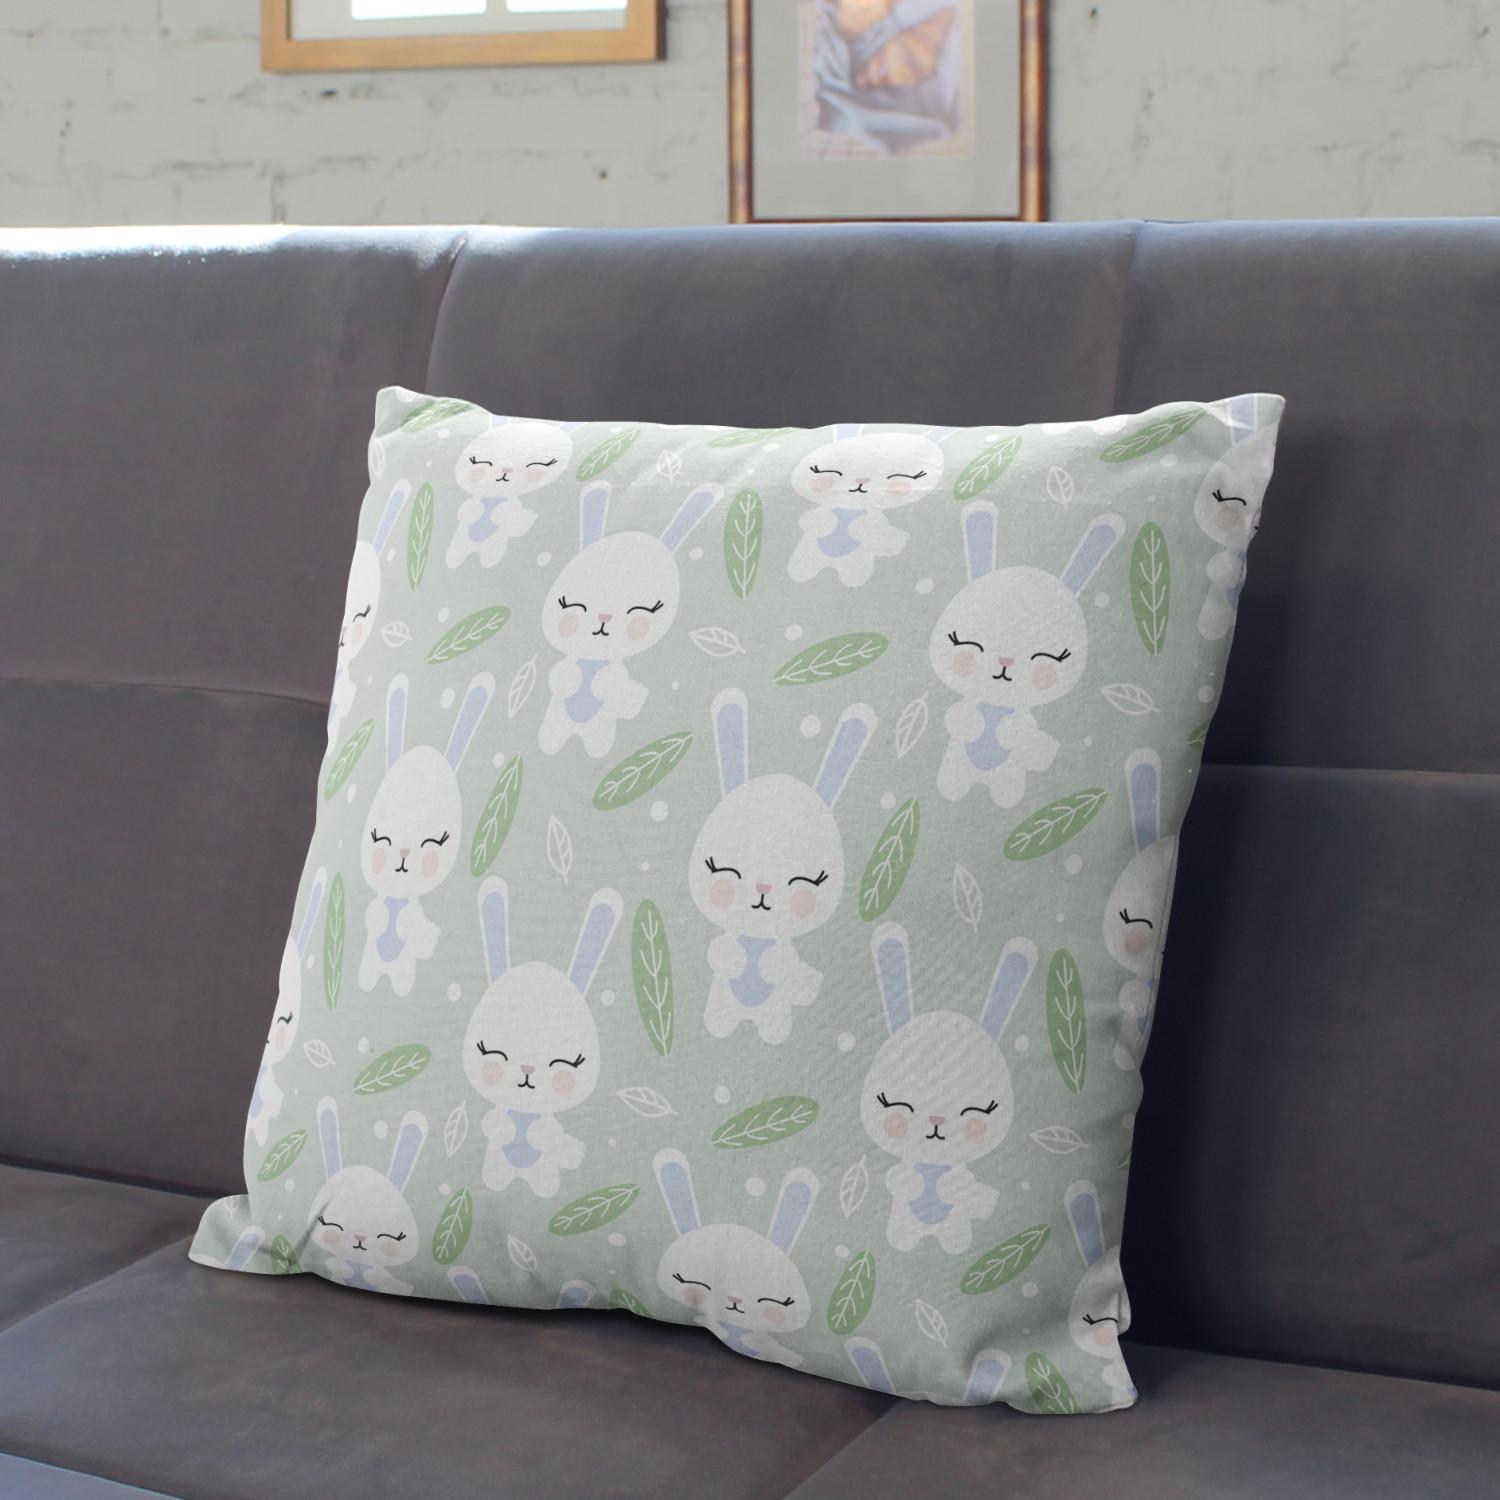 Decorative Microfiber Pillow Group of hares - composition in shades of white, blue and green cushions